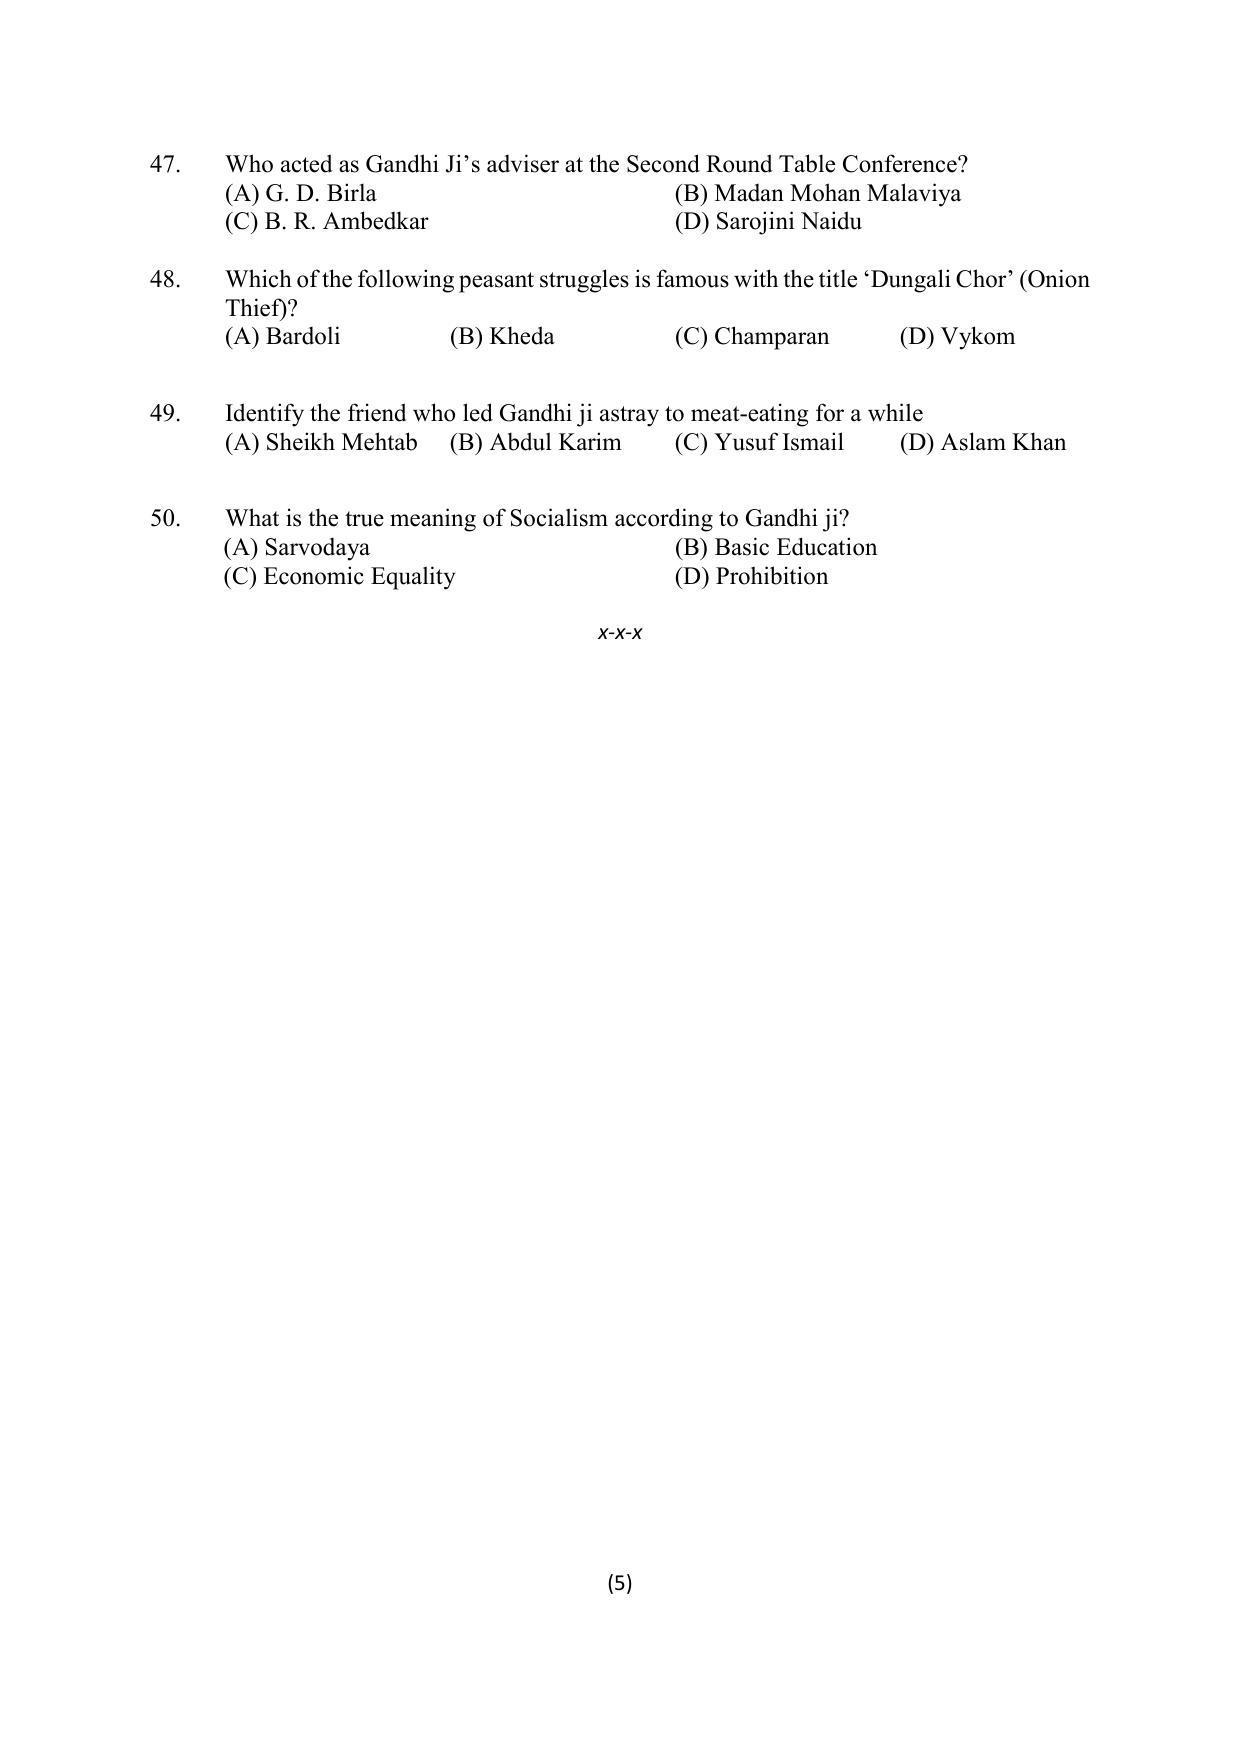 PU MPET Ancient Indian History & Archeology 2022 Question Papers - Page 17